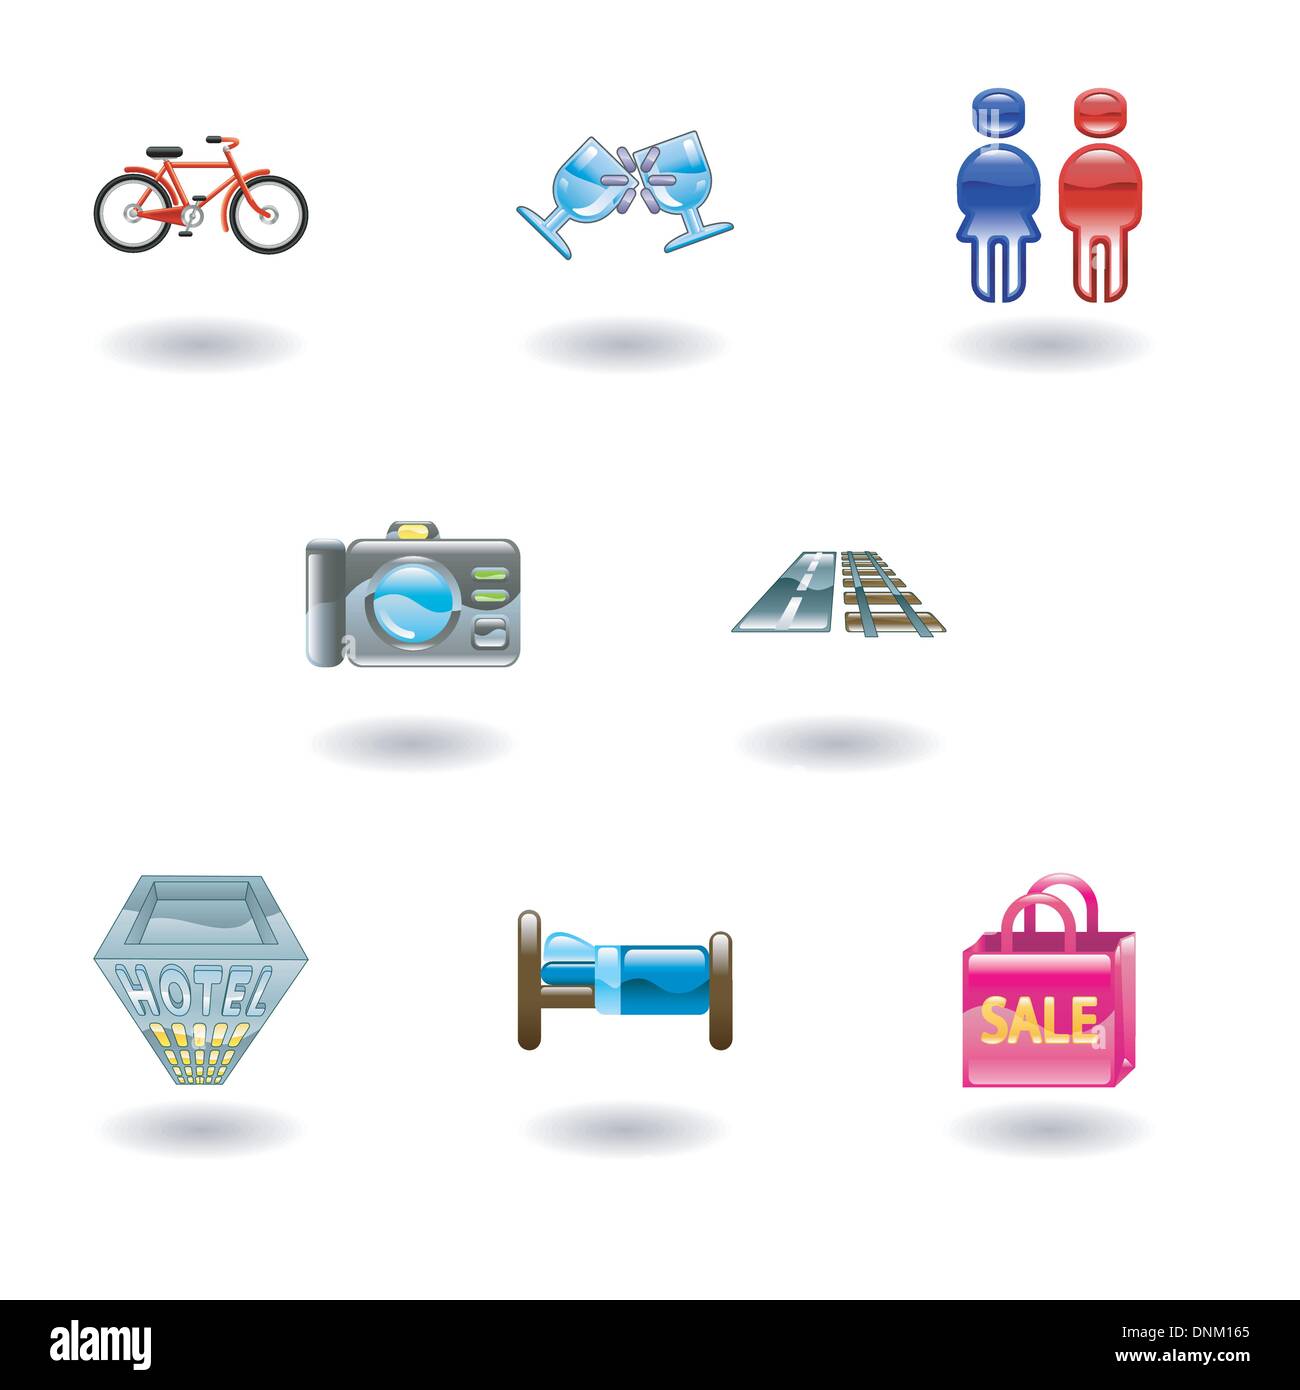 Tourist locations icon set Icon set relating to city or location information for tourist web sites or maps etc. Stock Vector